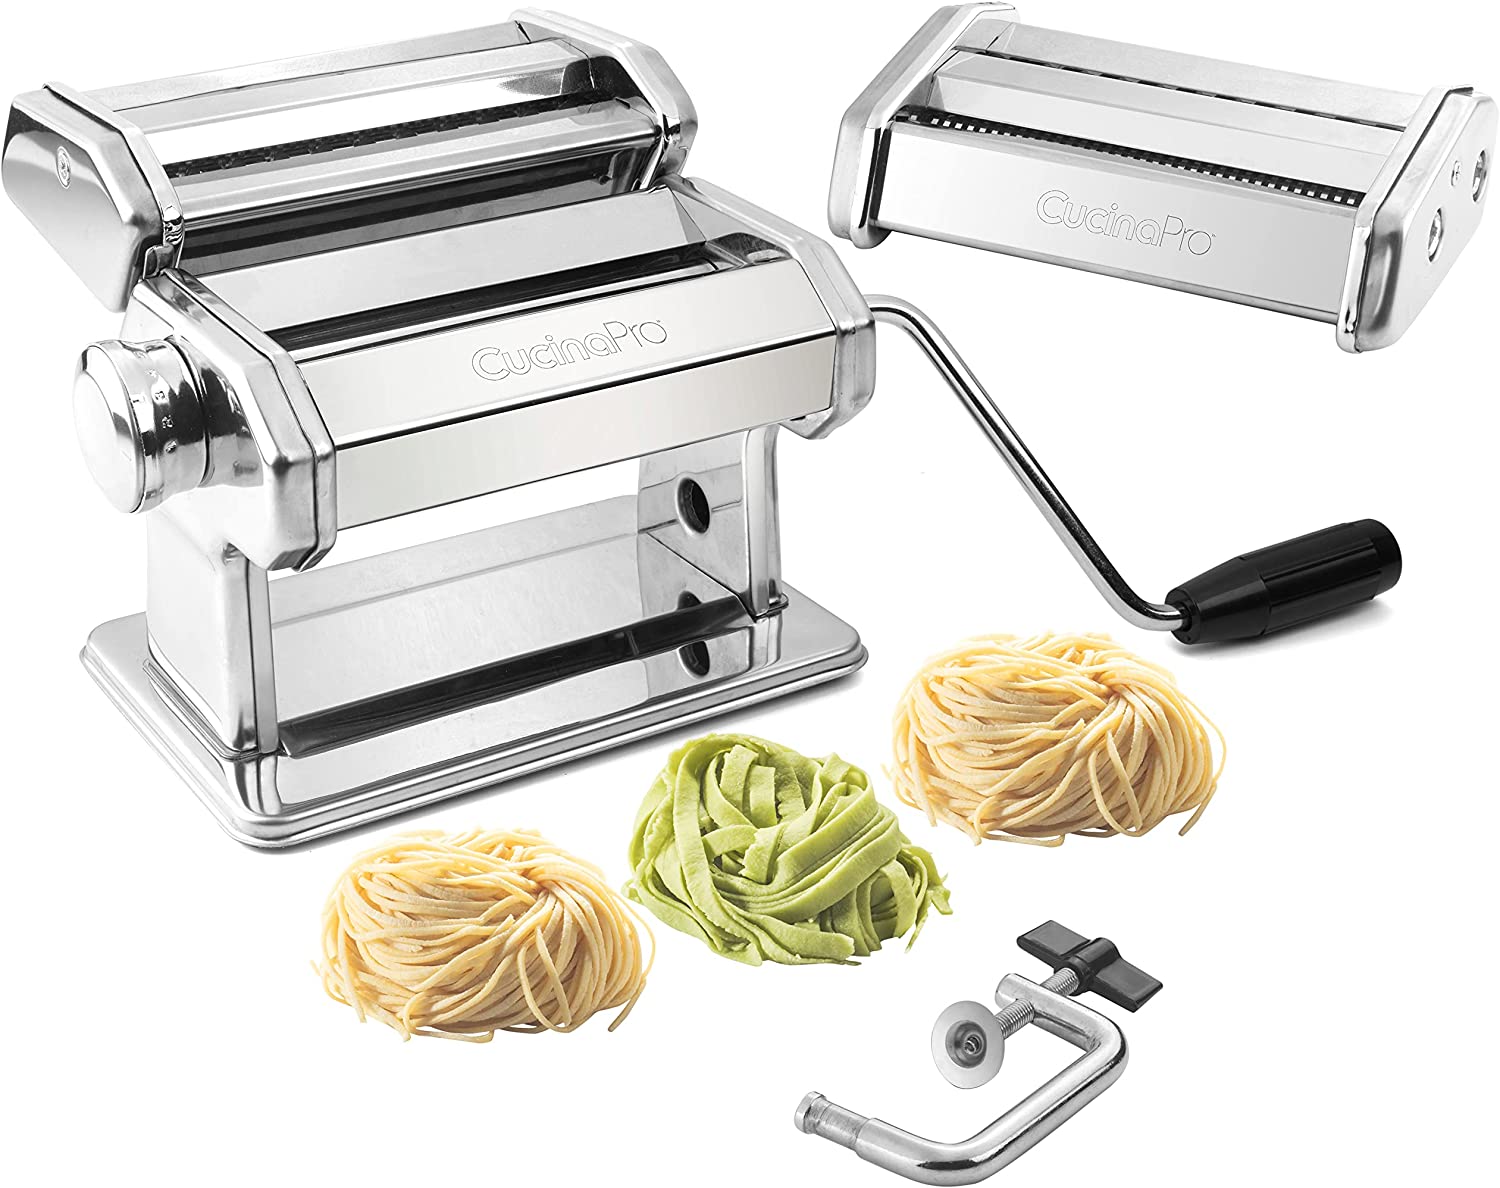 Pasta Maker Machine (177) By Cucina Pro - Heavy Duty Steel Construction - with Fettucine and Spaghetti attachment and Recipes - image 1 of 5